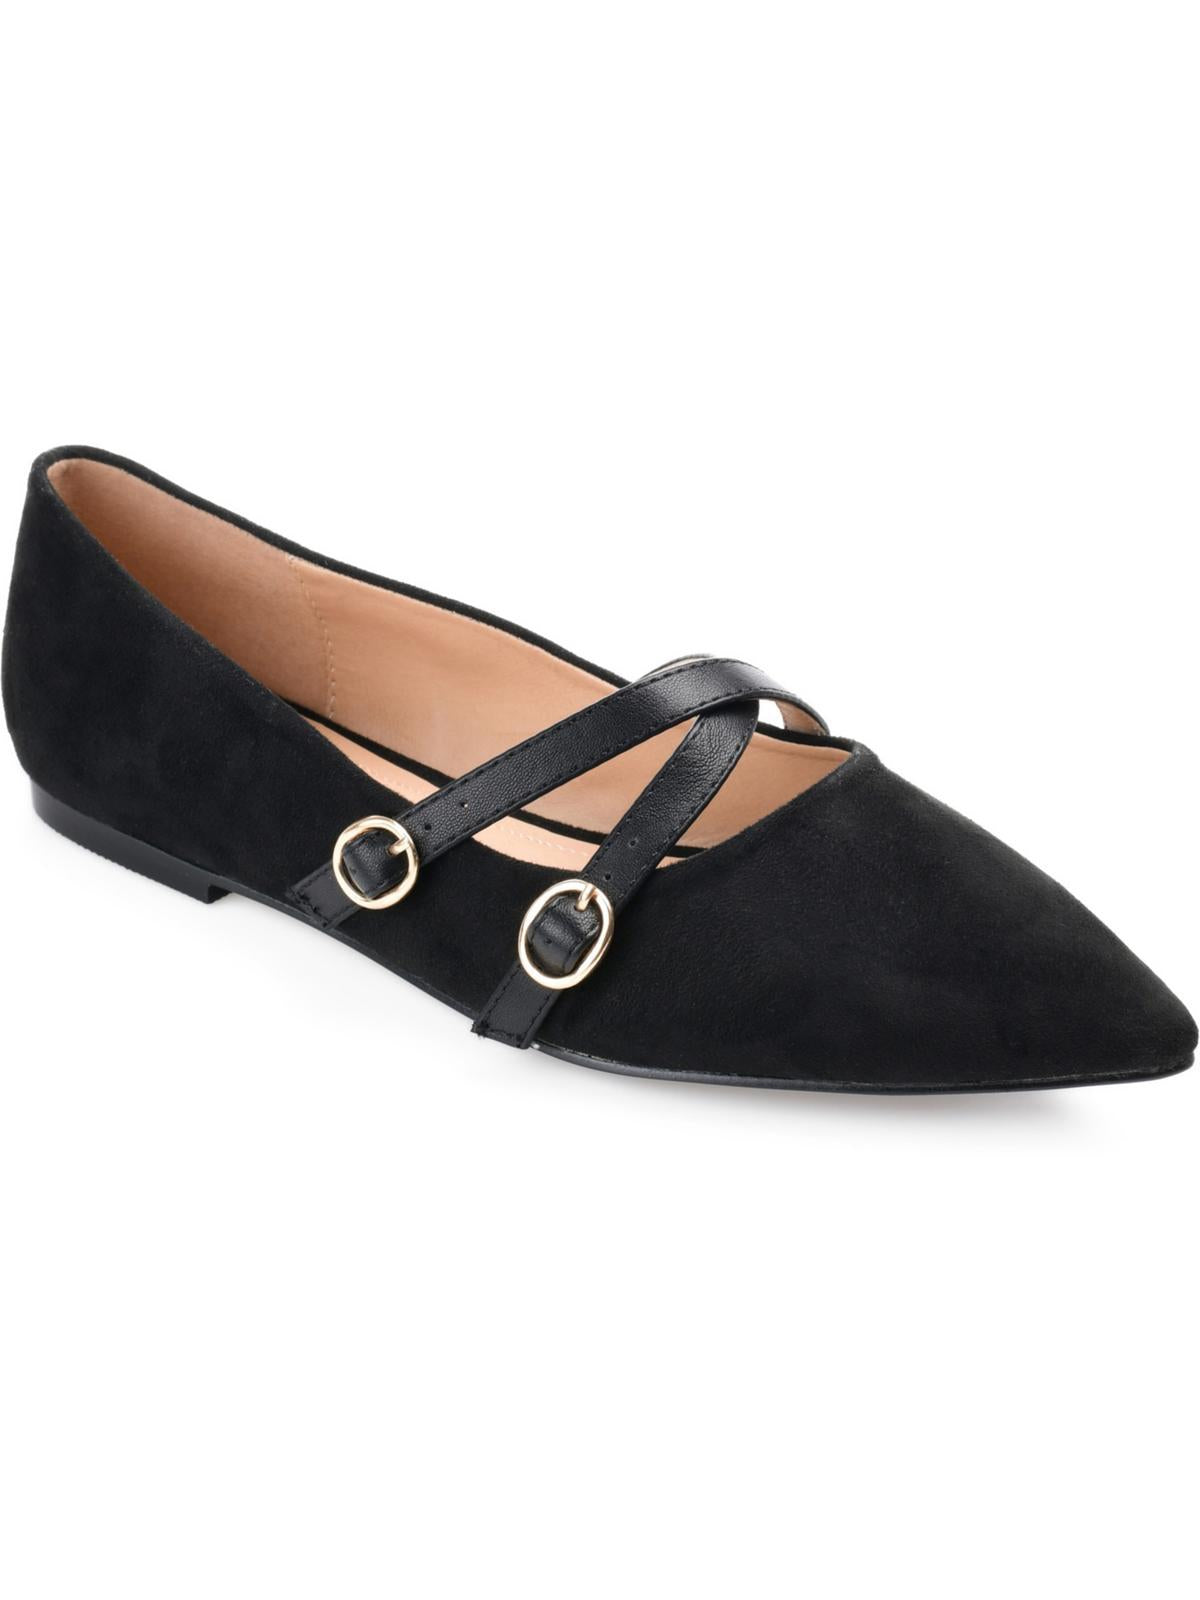 JOURNEE COLLECTION Patricia Womens Faux Suede Pointed Toe Loafers